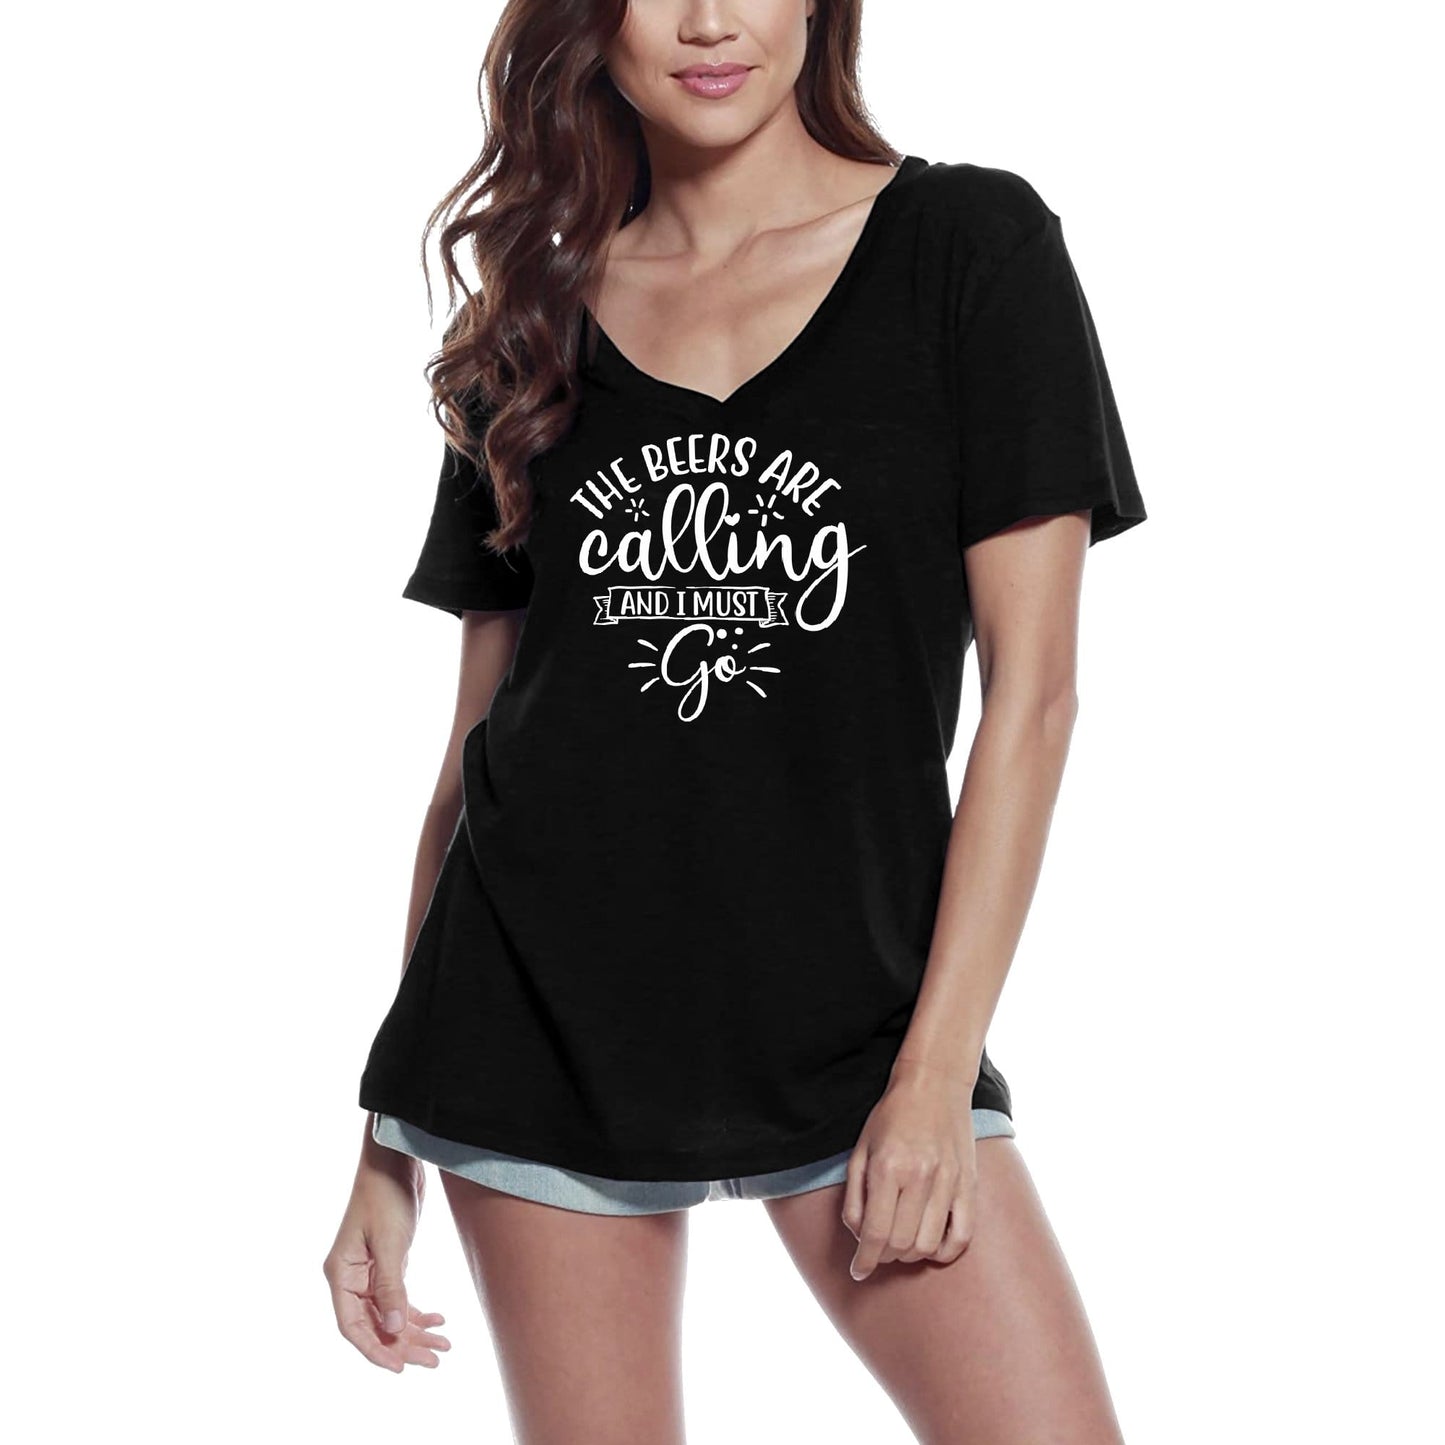 ULTRABASIC Women's T-Shirt The Beers are Calling and I Must Go - Funny Short Sleeve Tee Shirt